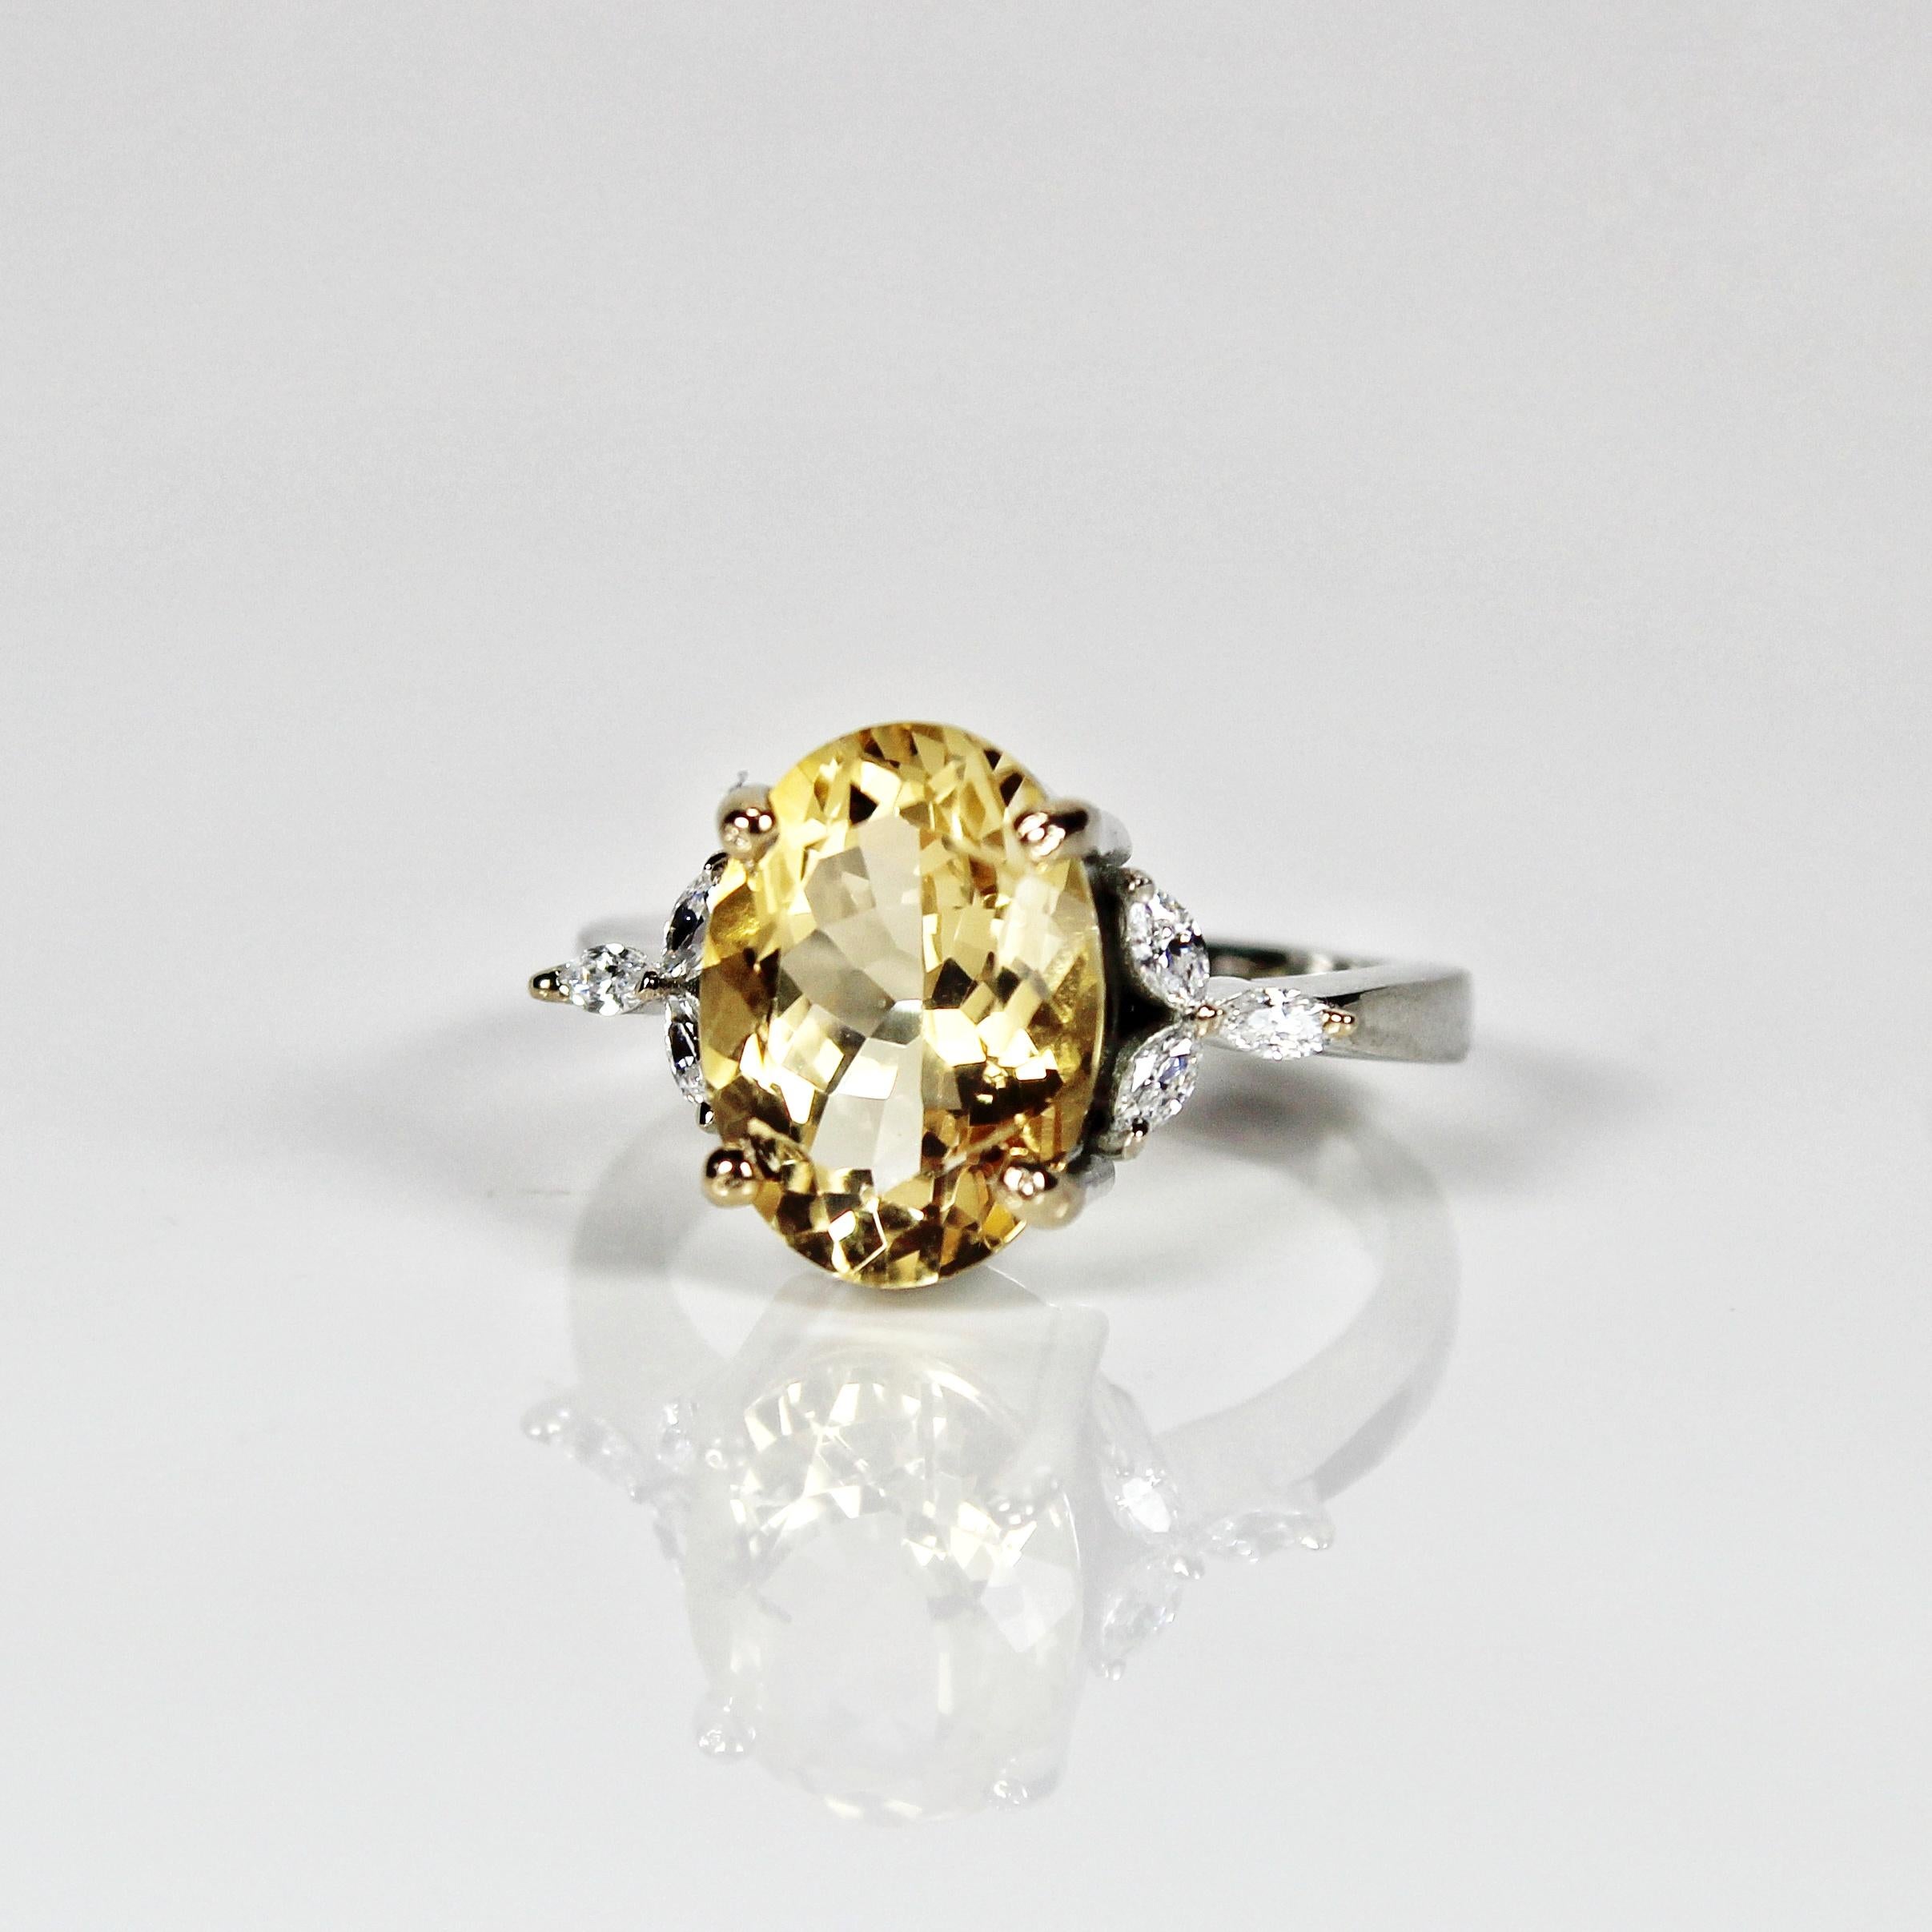 Metal - Silver
Indian ring size - 11
Product gross Weight - 4.130 Grams
Gemstone - Natural Citrine
Stone weight - 3.45 Carat
Stone shape - Oval
Stone size - 12 x 8 mm
Diamonds - Swarovski

Elegant designer ring made in silver with beautiful natural